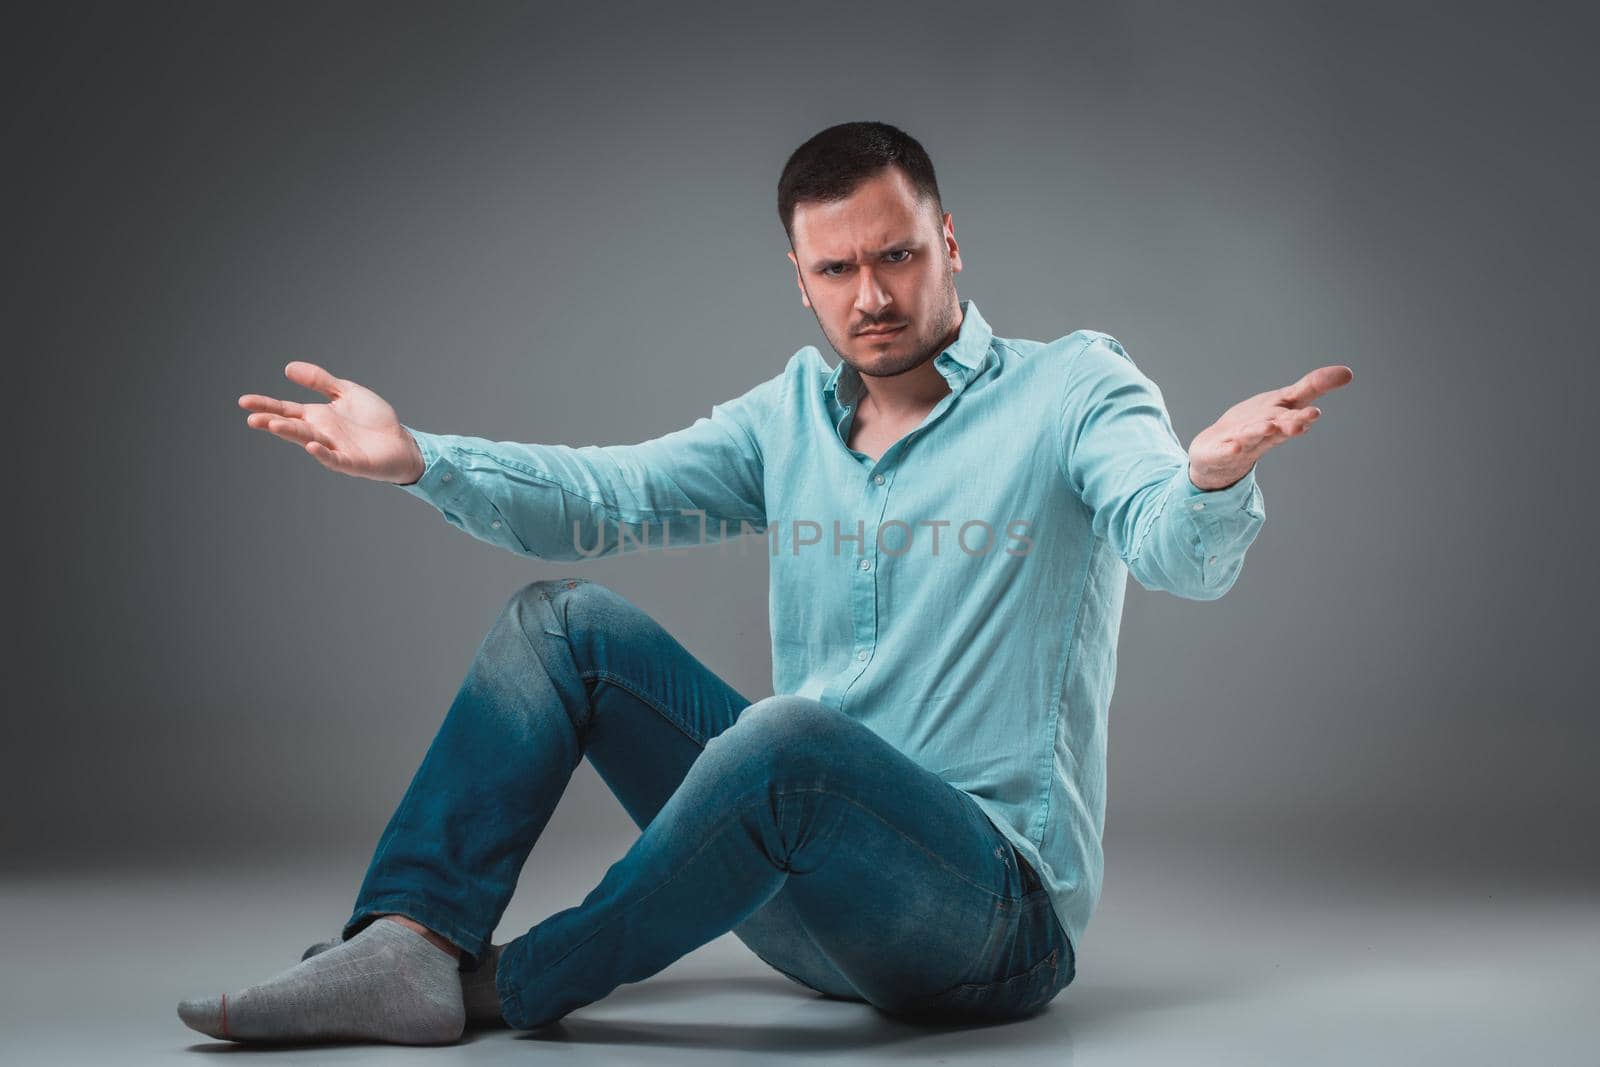 Handsome young man sitting on a floor with raised hands gesturing on gray background by nazarovsergey